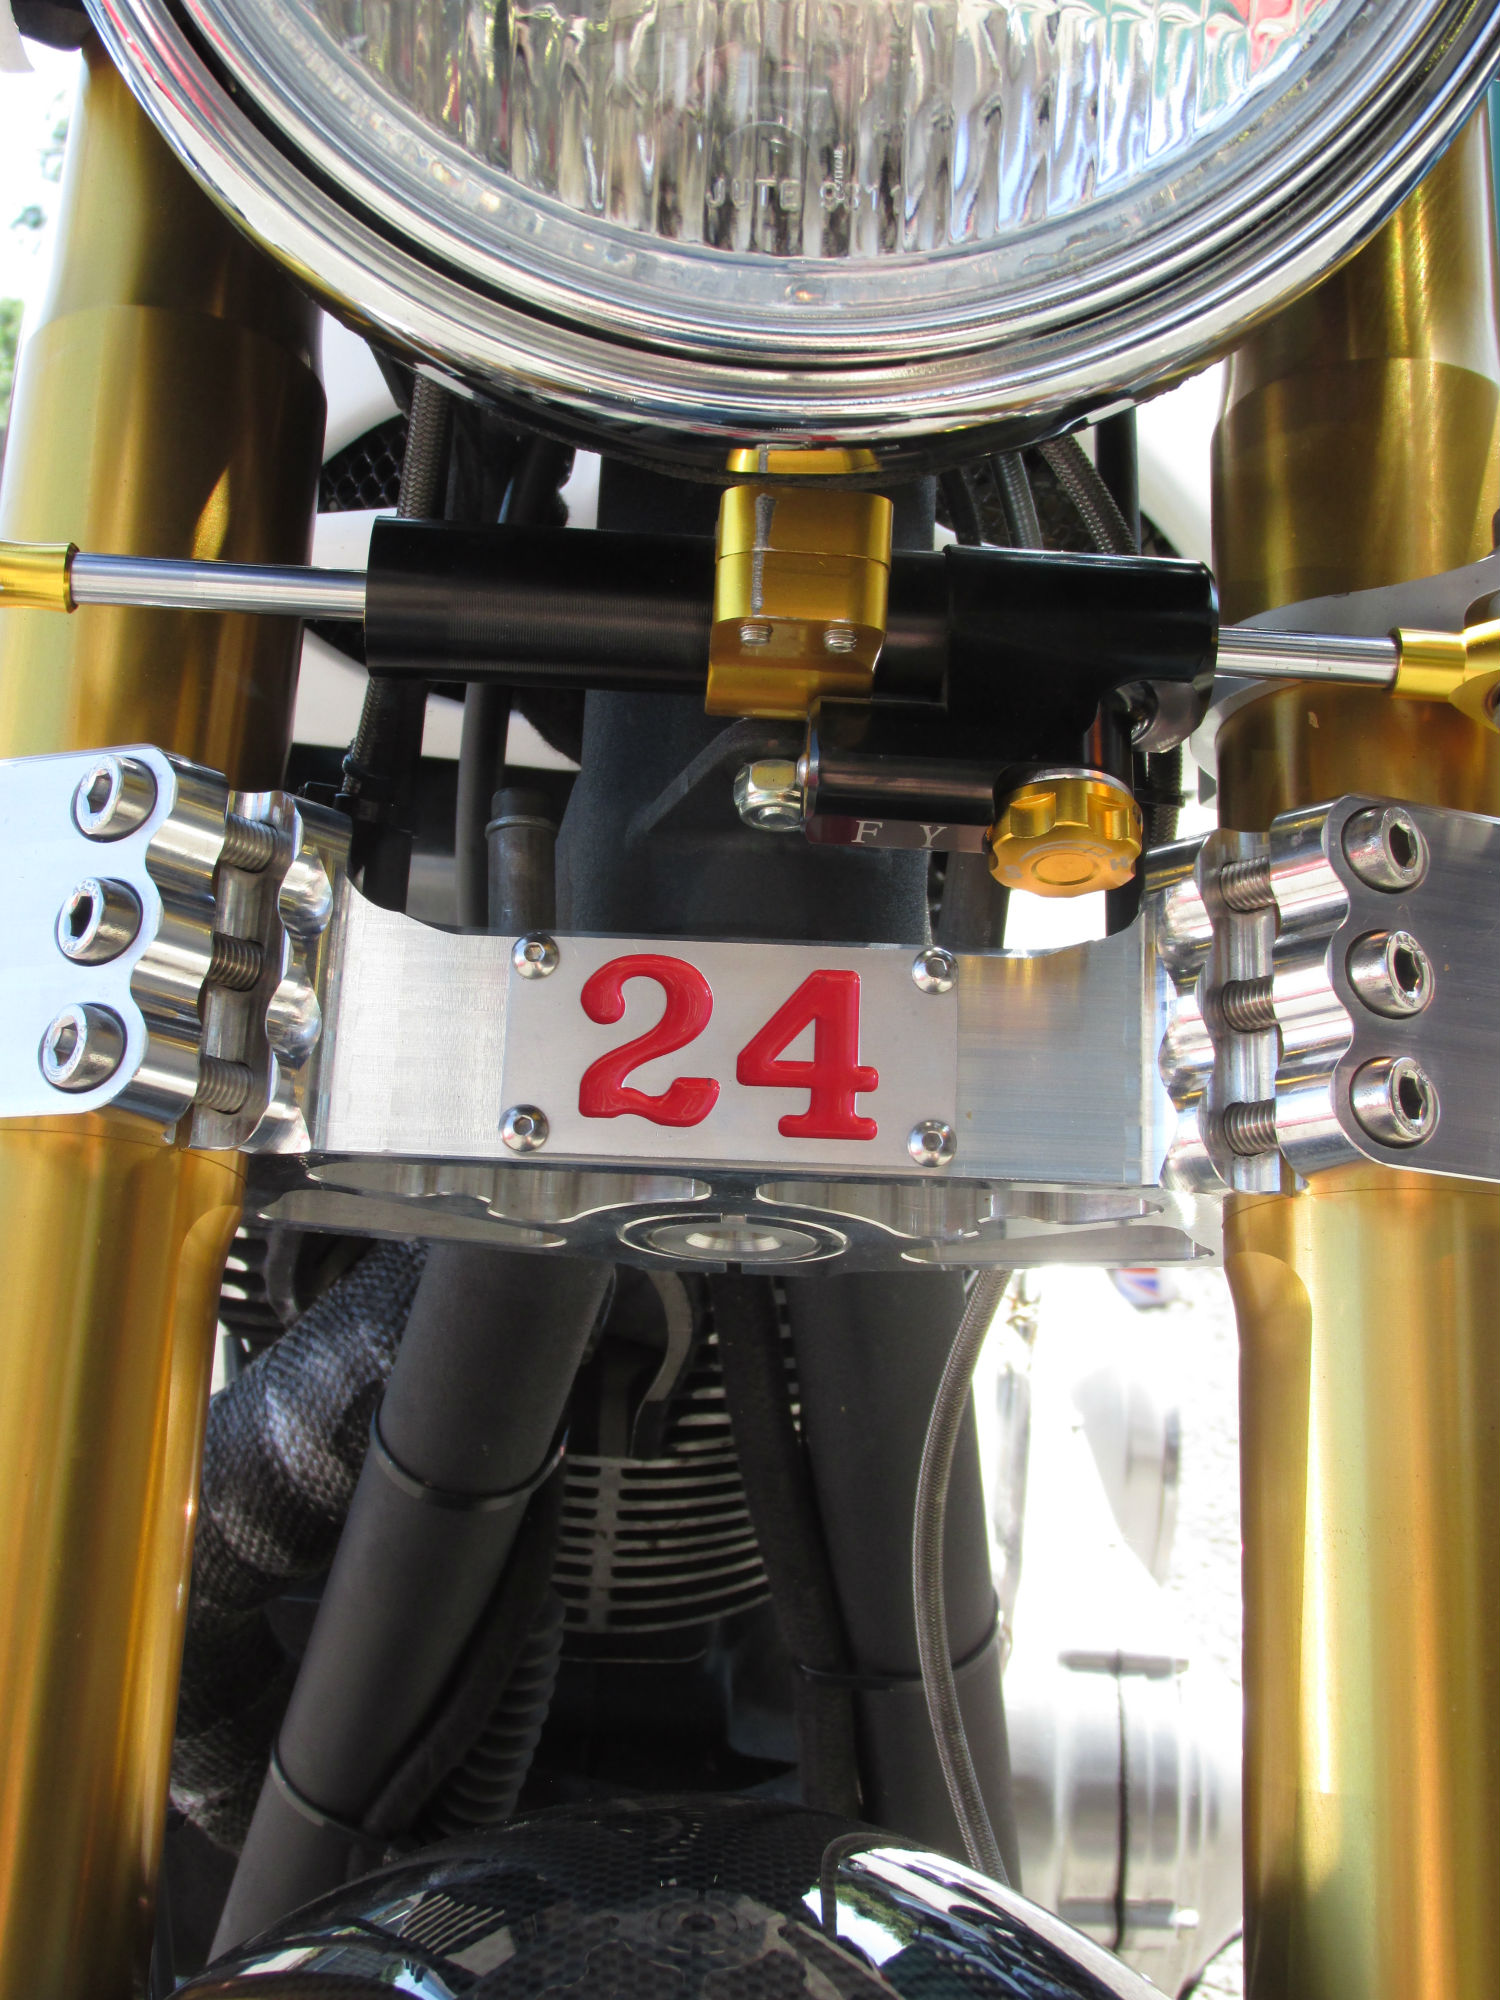 World first test: Hesketh 24 review